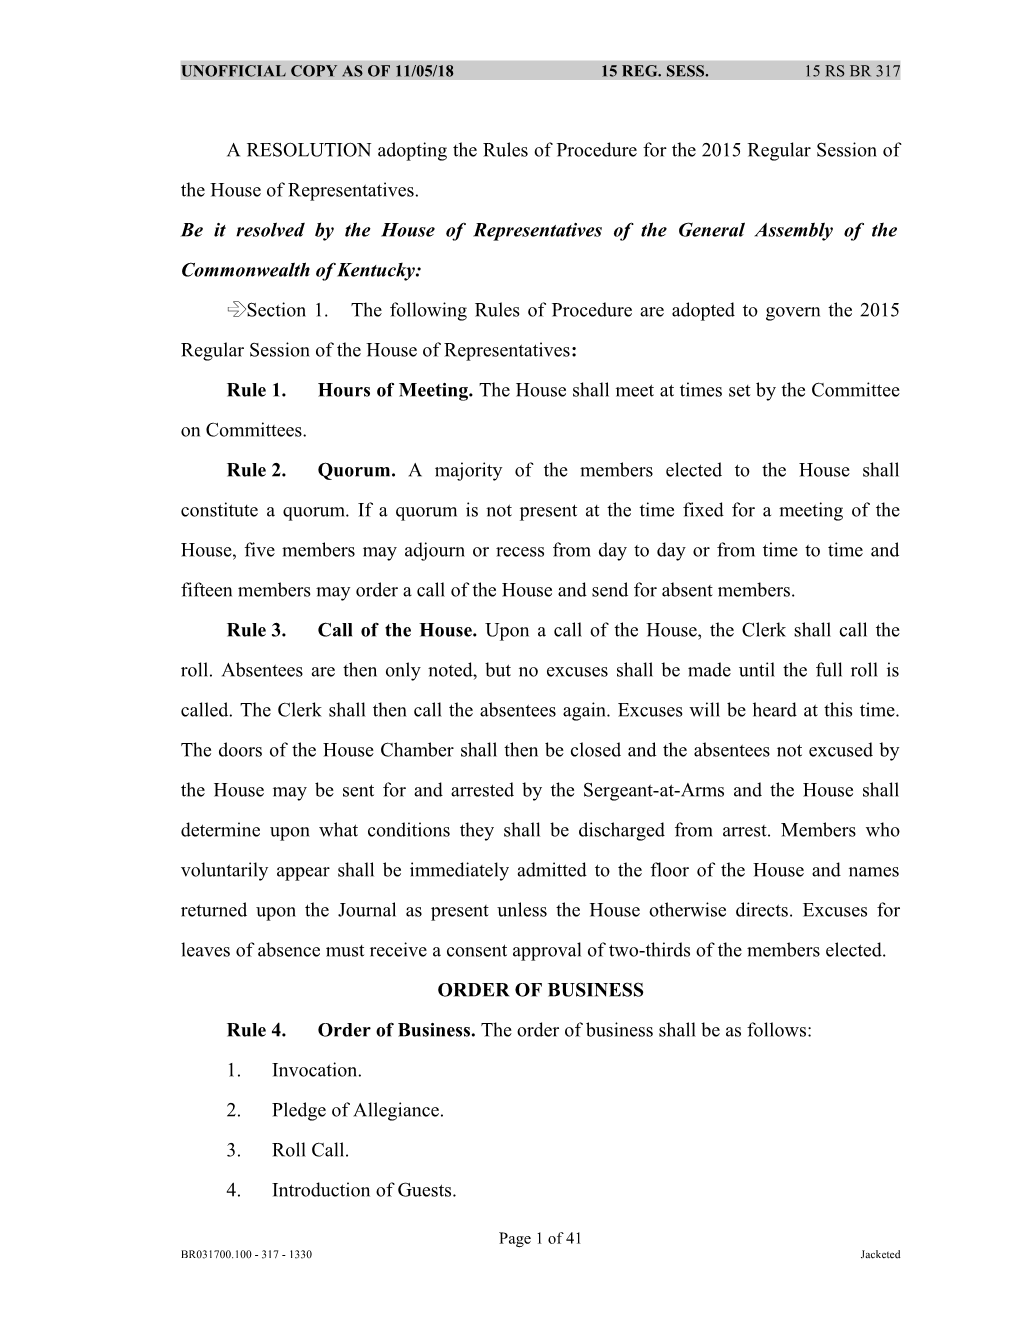 A RESOLUTION Adopting the Rules of Procedure for the 2015 Regular Session of the House